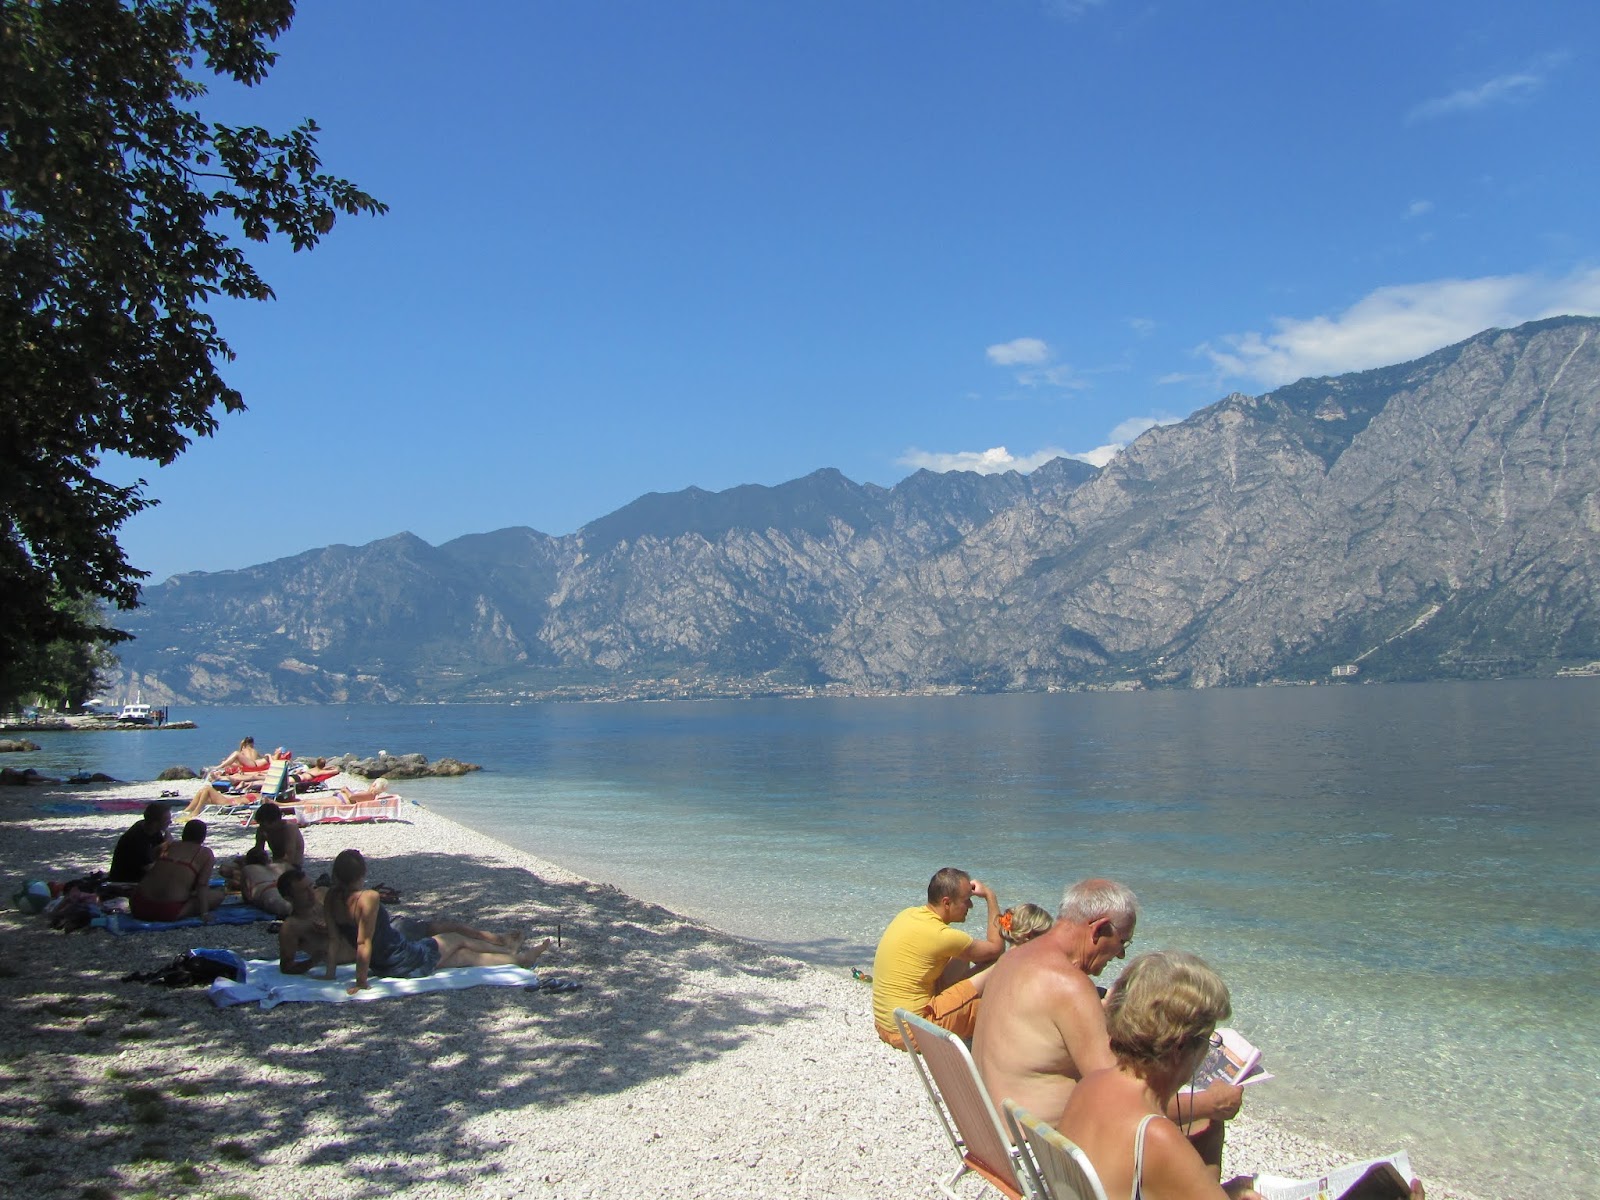 Photo of Spiaggia Baitone surrounded by mountains